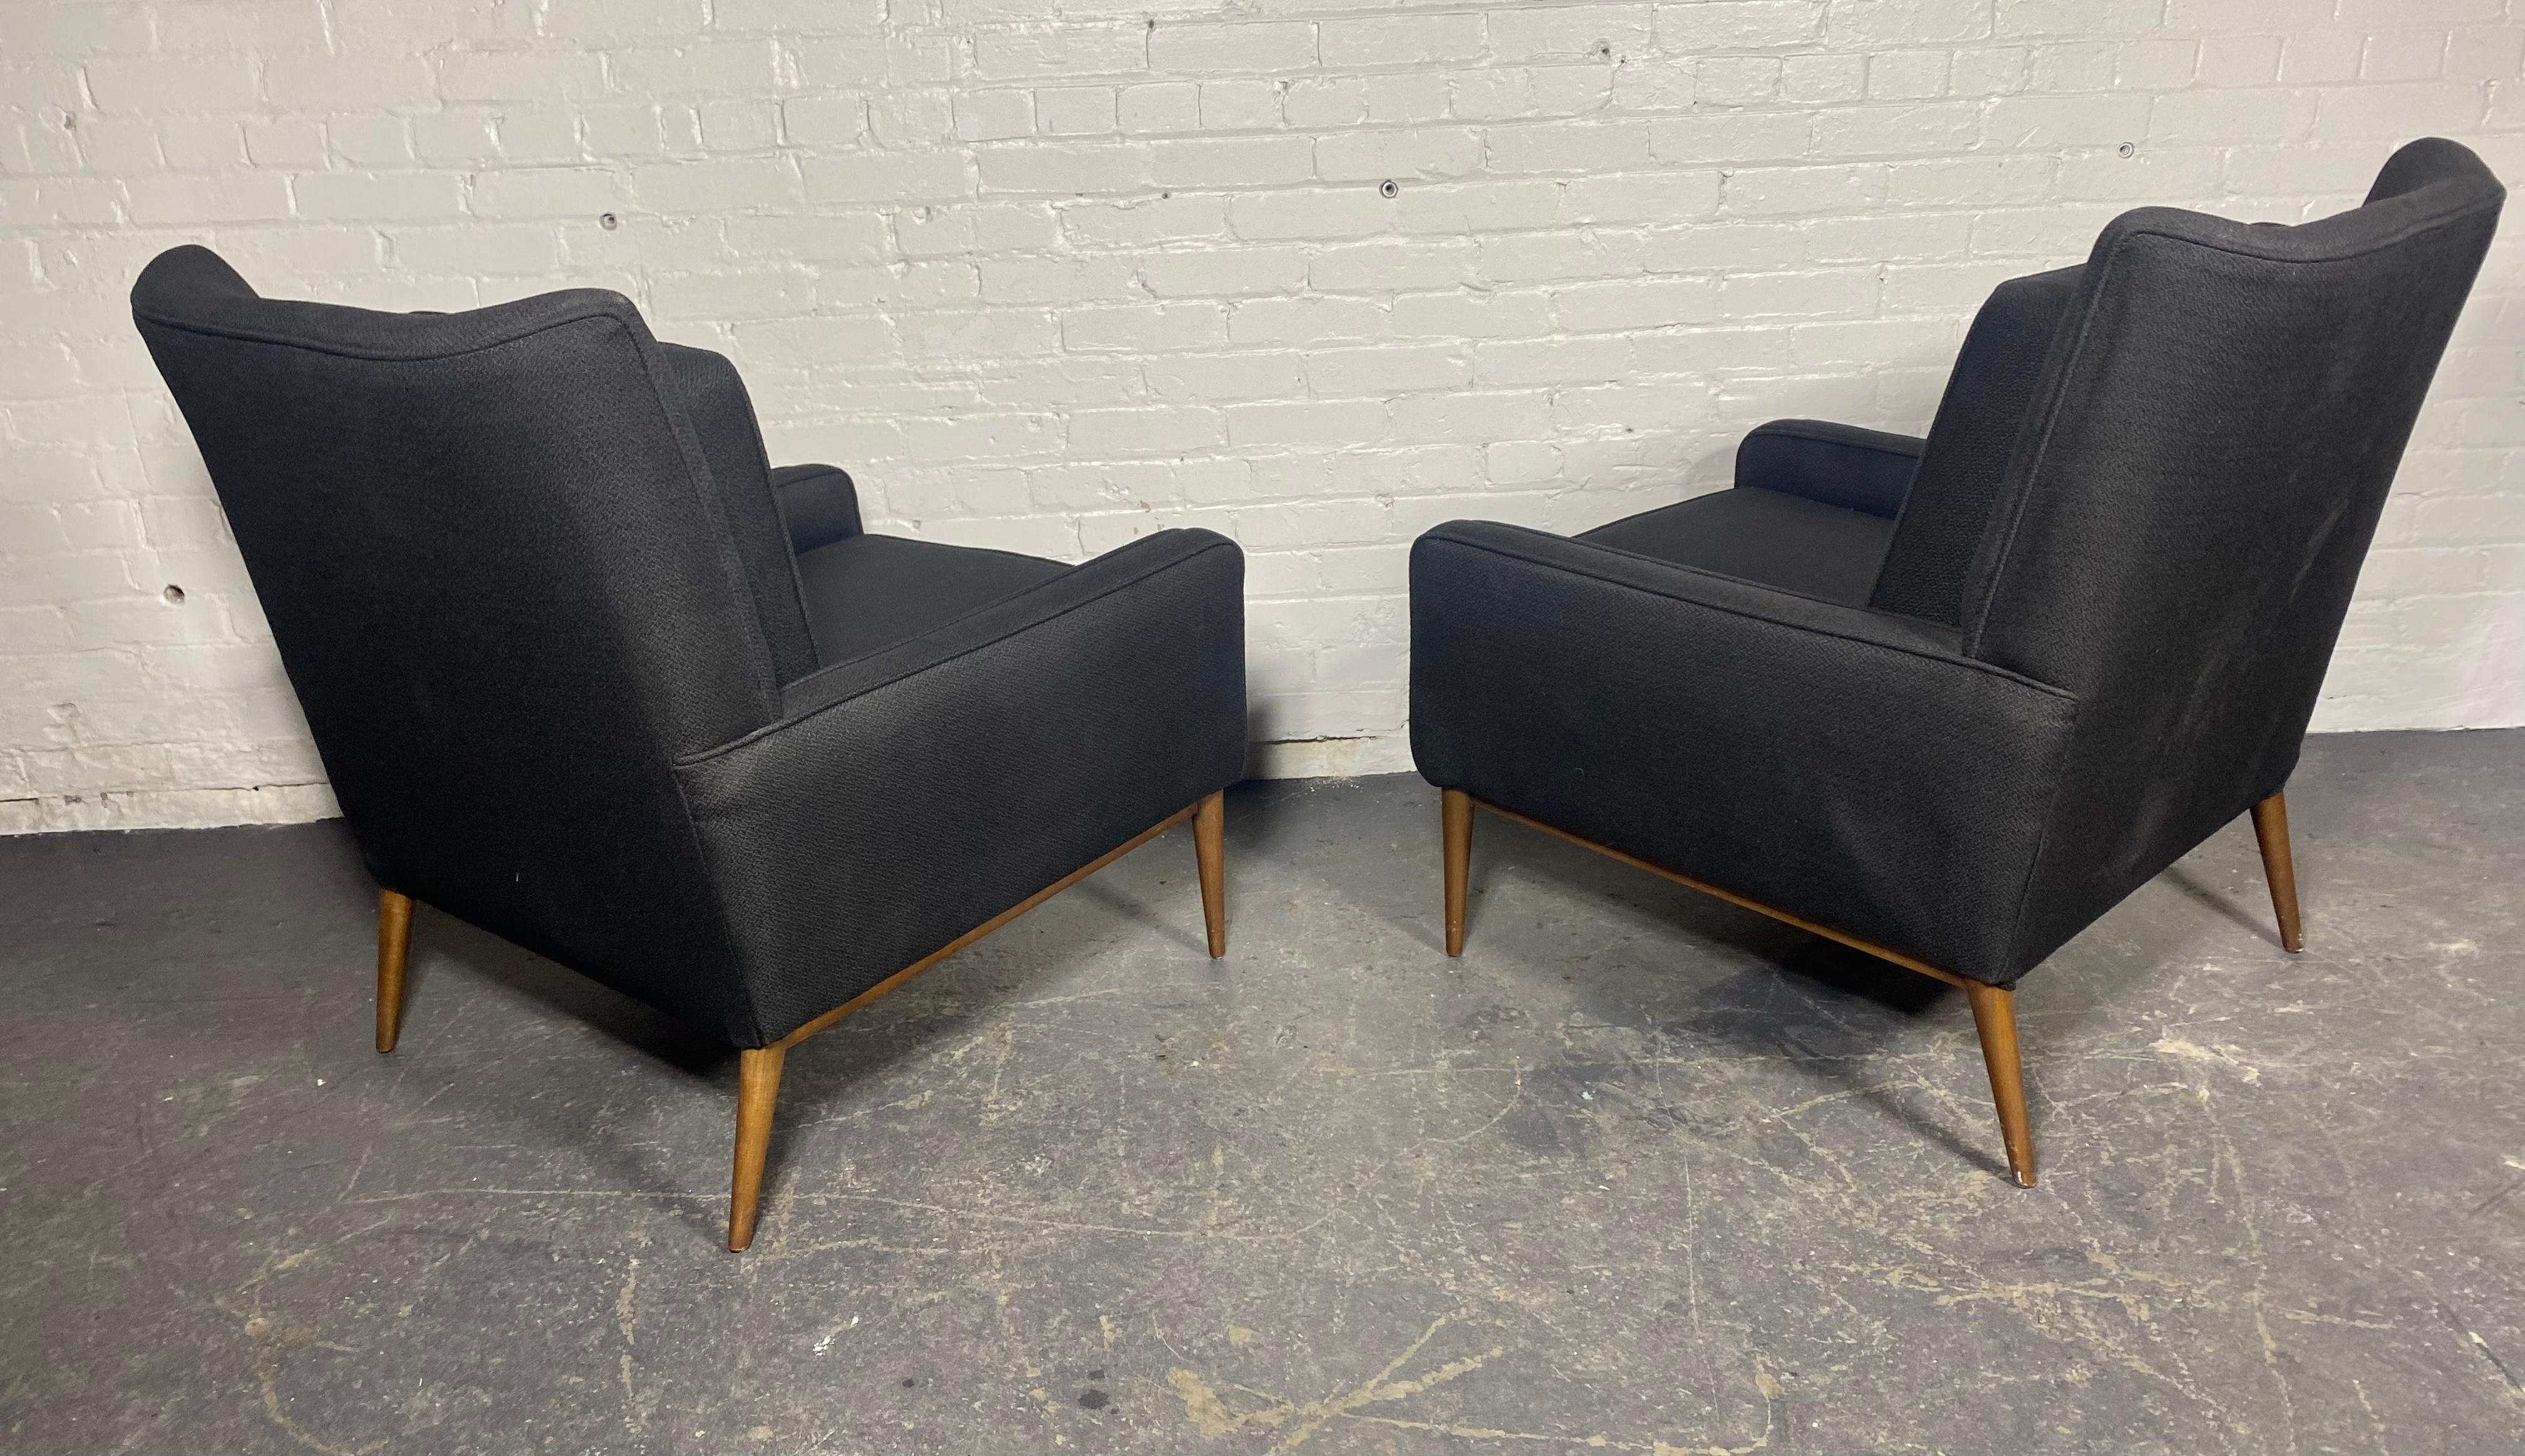 Classic Pair Modernist Lounge Chairs attributed to Paul McCobb / Directional For Sale 4